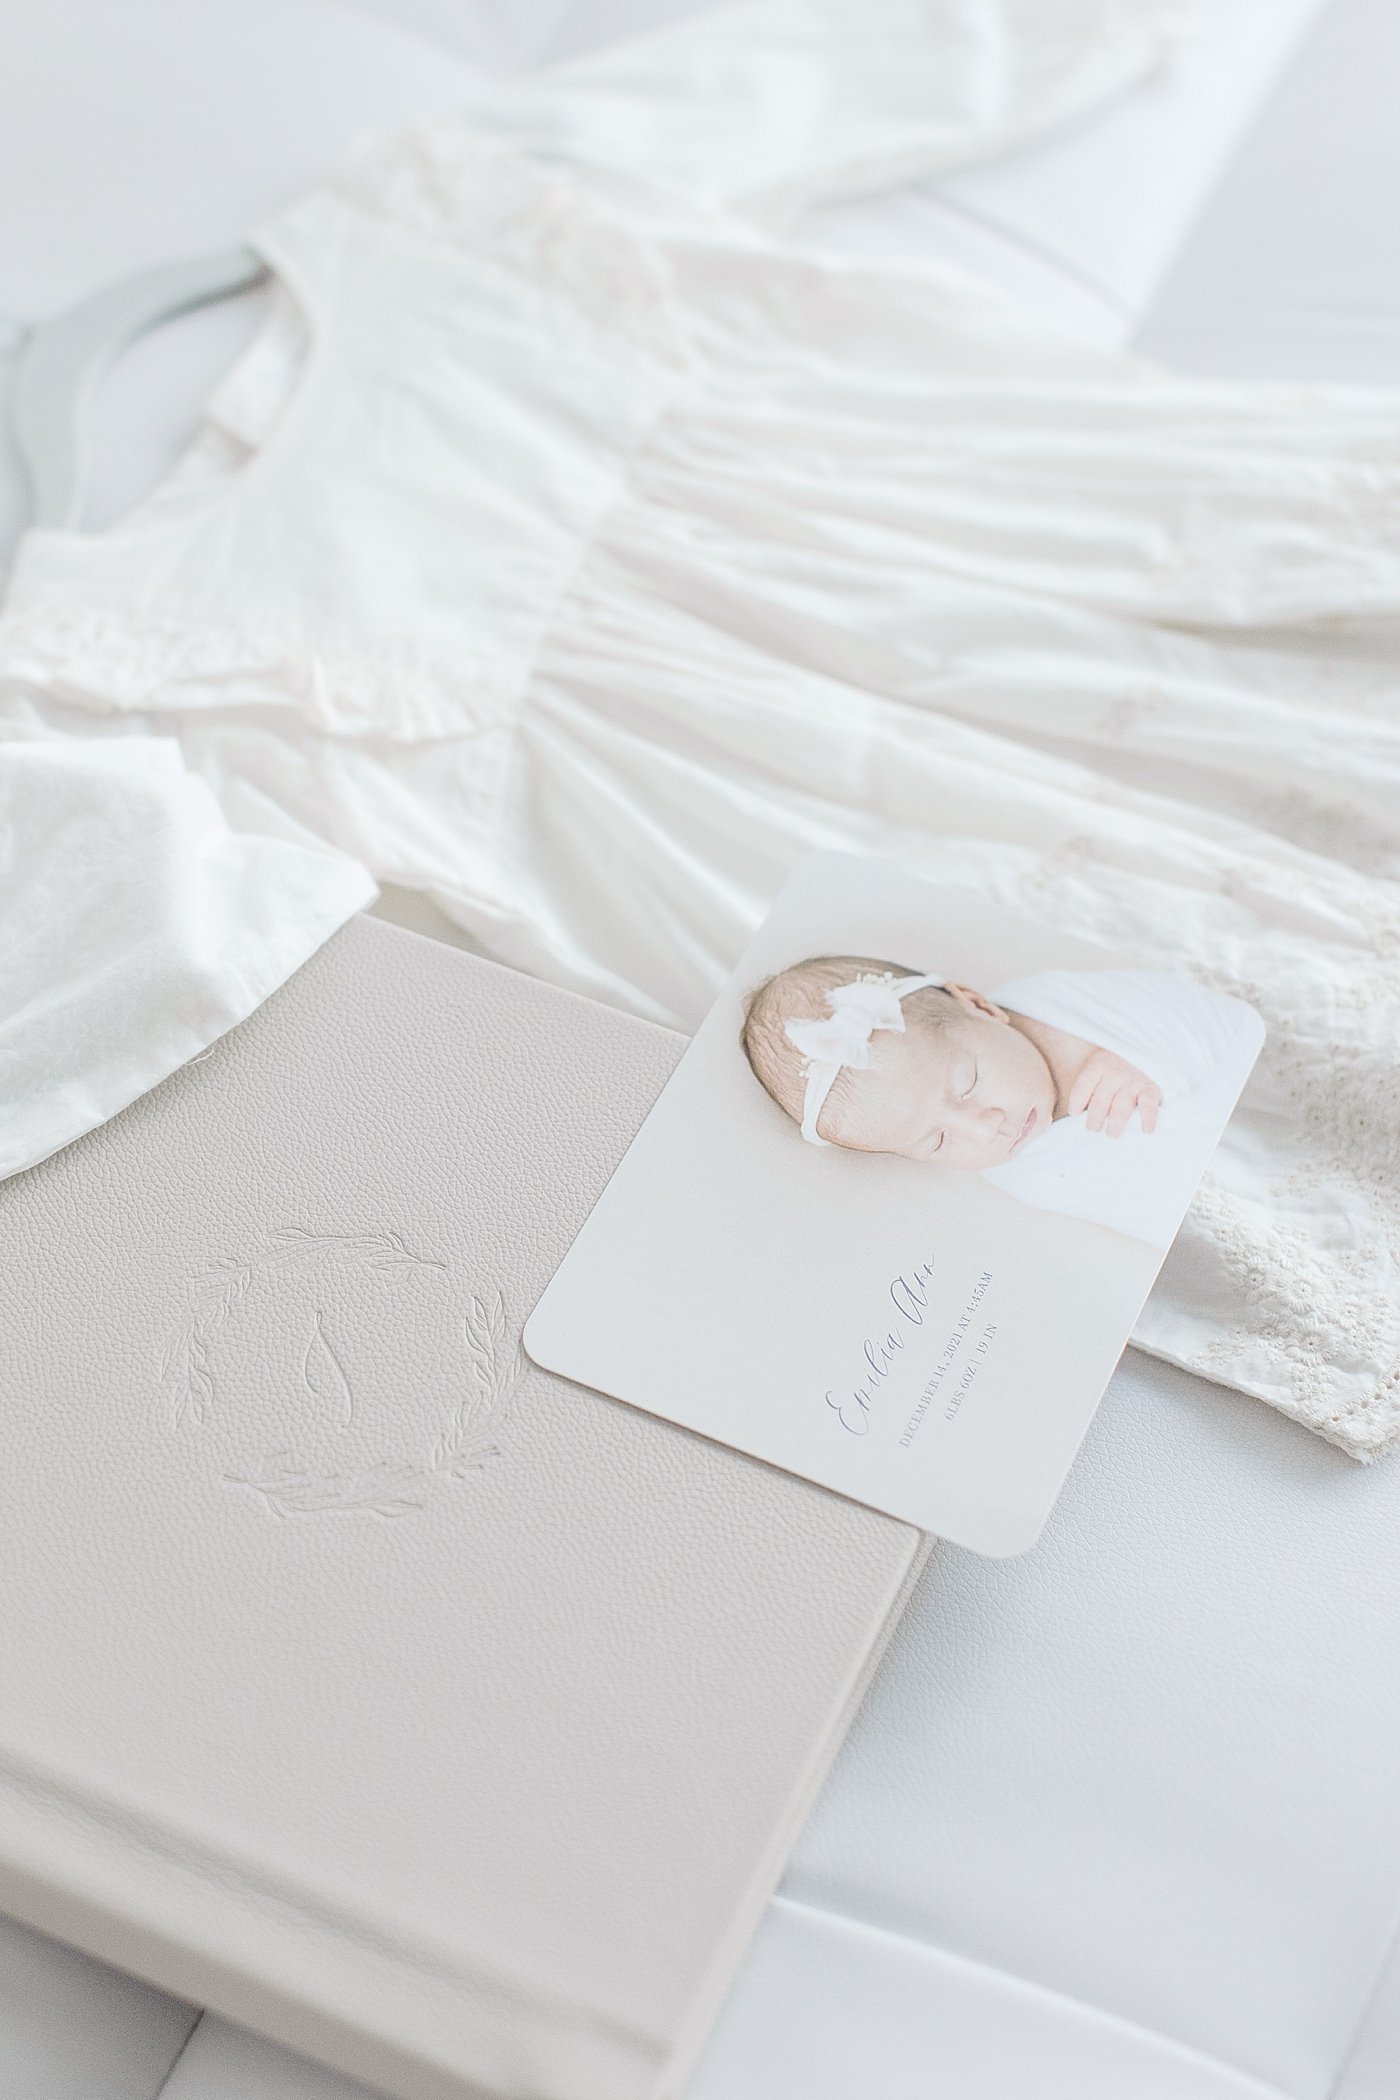 Personalized Newborn Baby Album with Newport Beach Photographer | Ambre Williams Photography